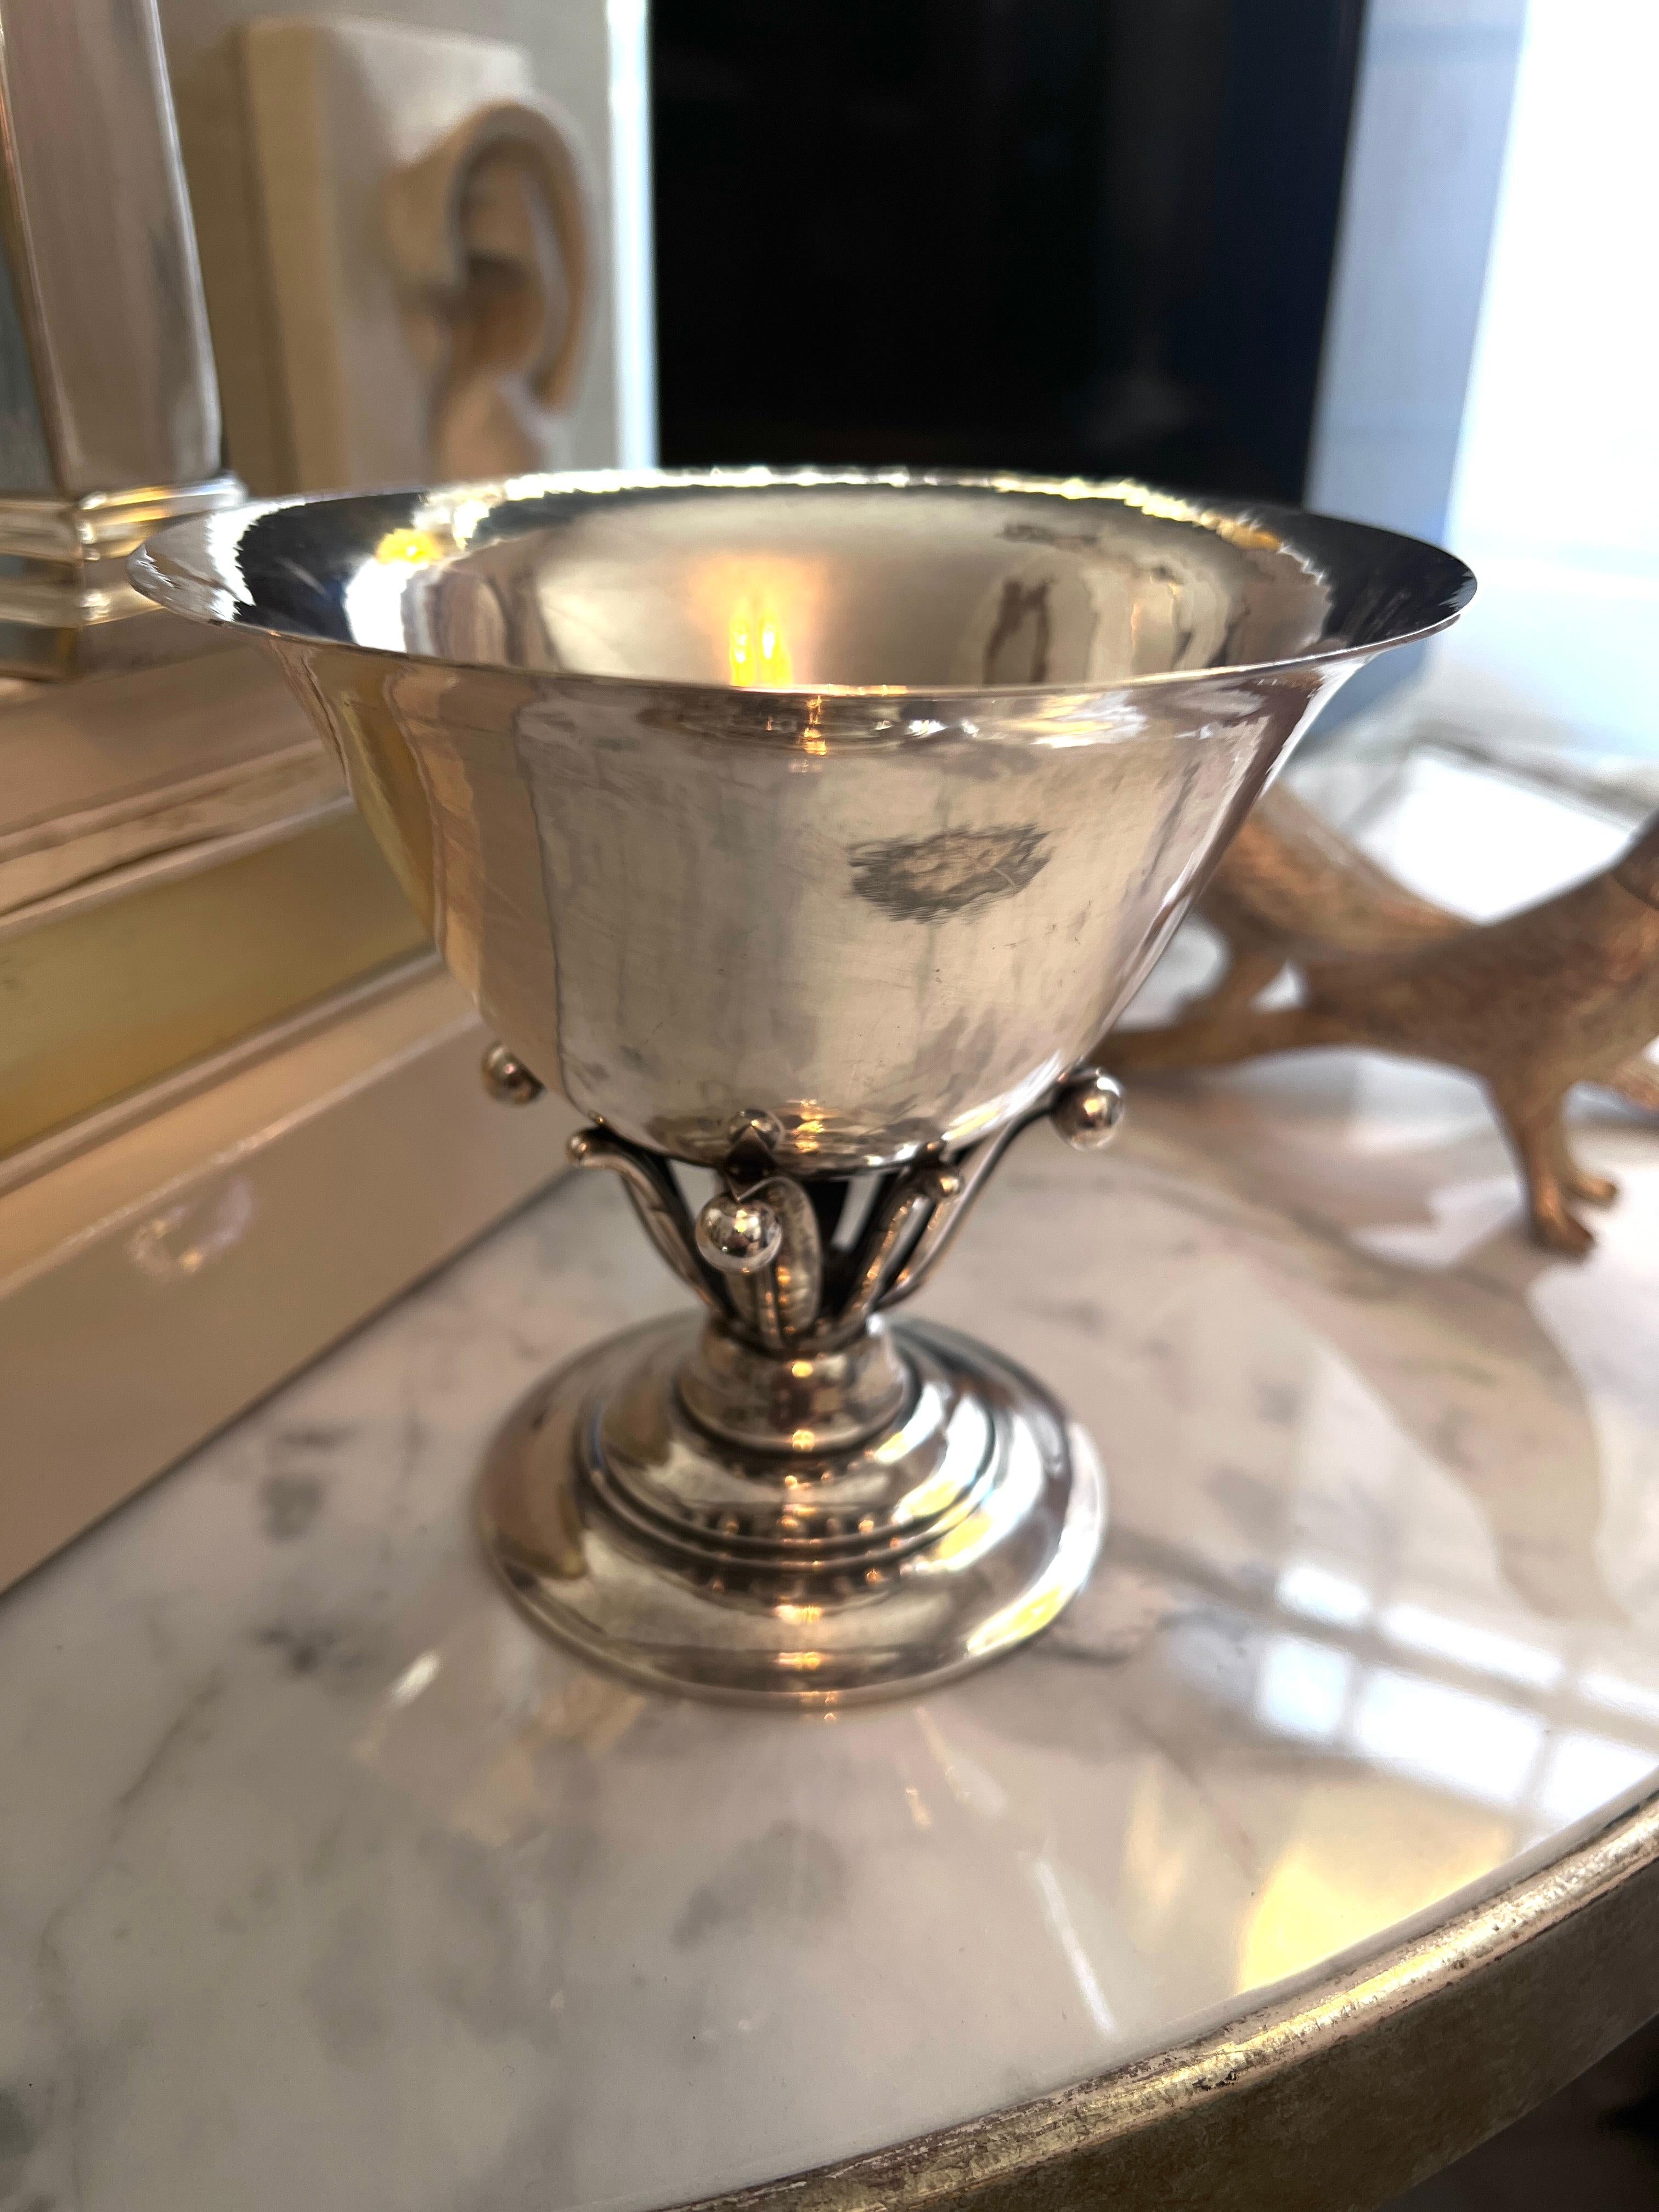 A classic Georg Jensen style bowl designed by Johan Rohde - the attention to details on the base is exquiste and quite indicative of a Jensen piece.  

A lovely addition to many places - a condiment bowl on the bar, candy dish on the cocktail table